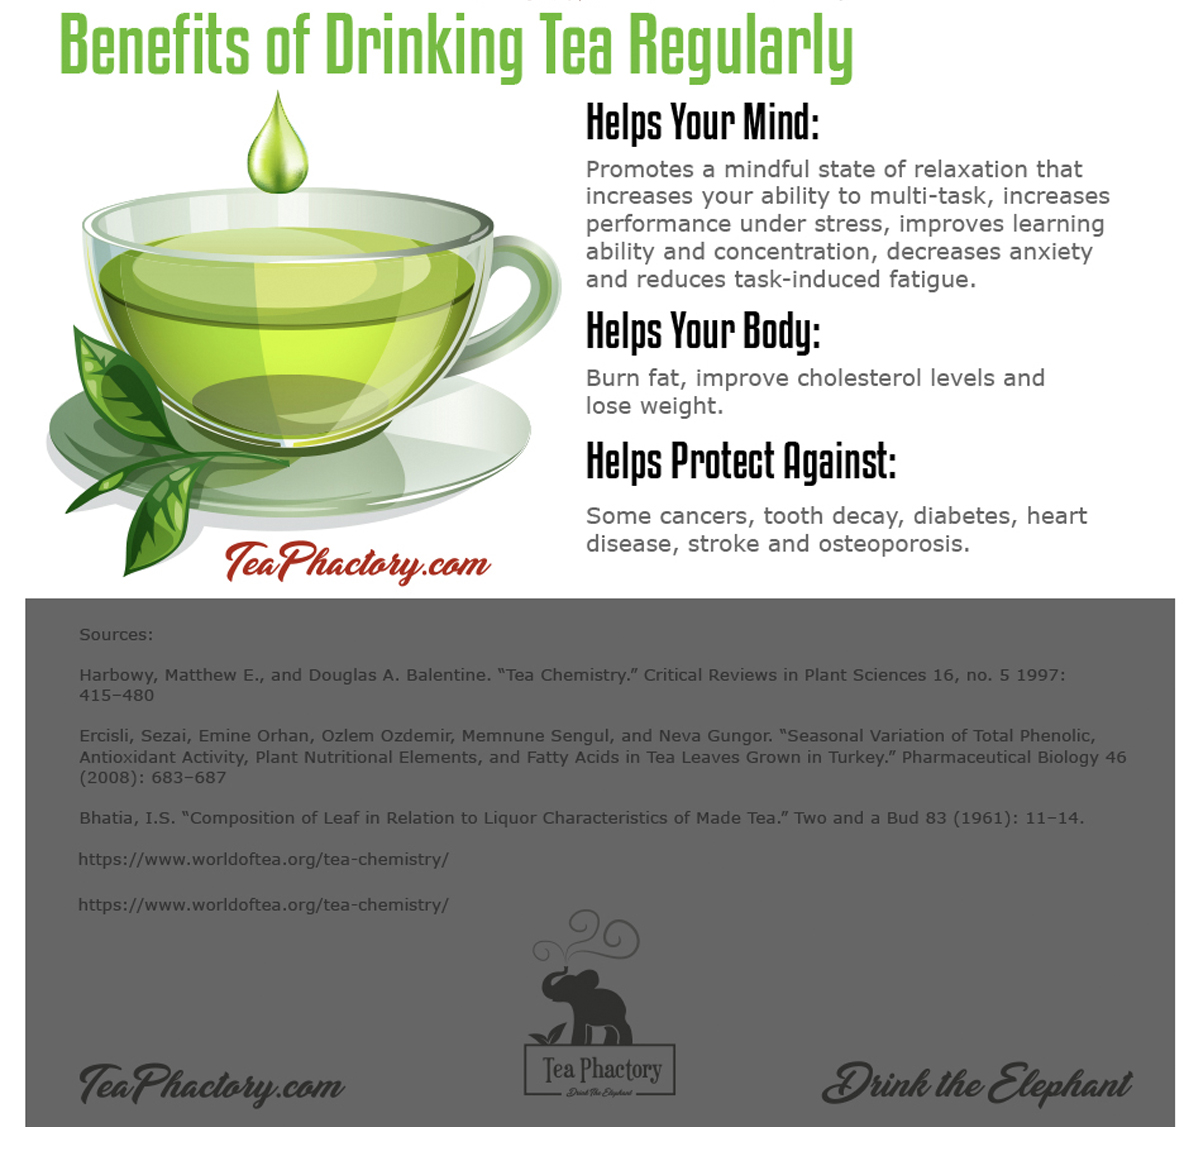 Why is tea good for you? Digital Infographic and Print Poster